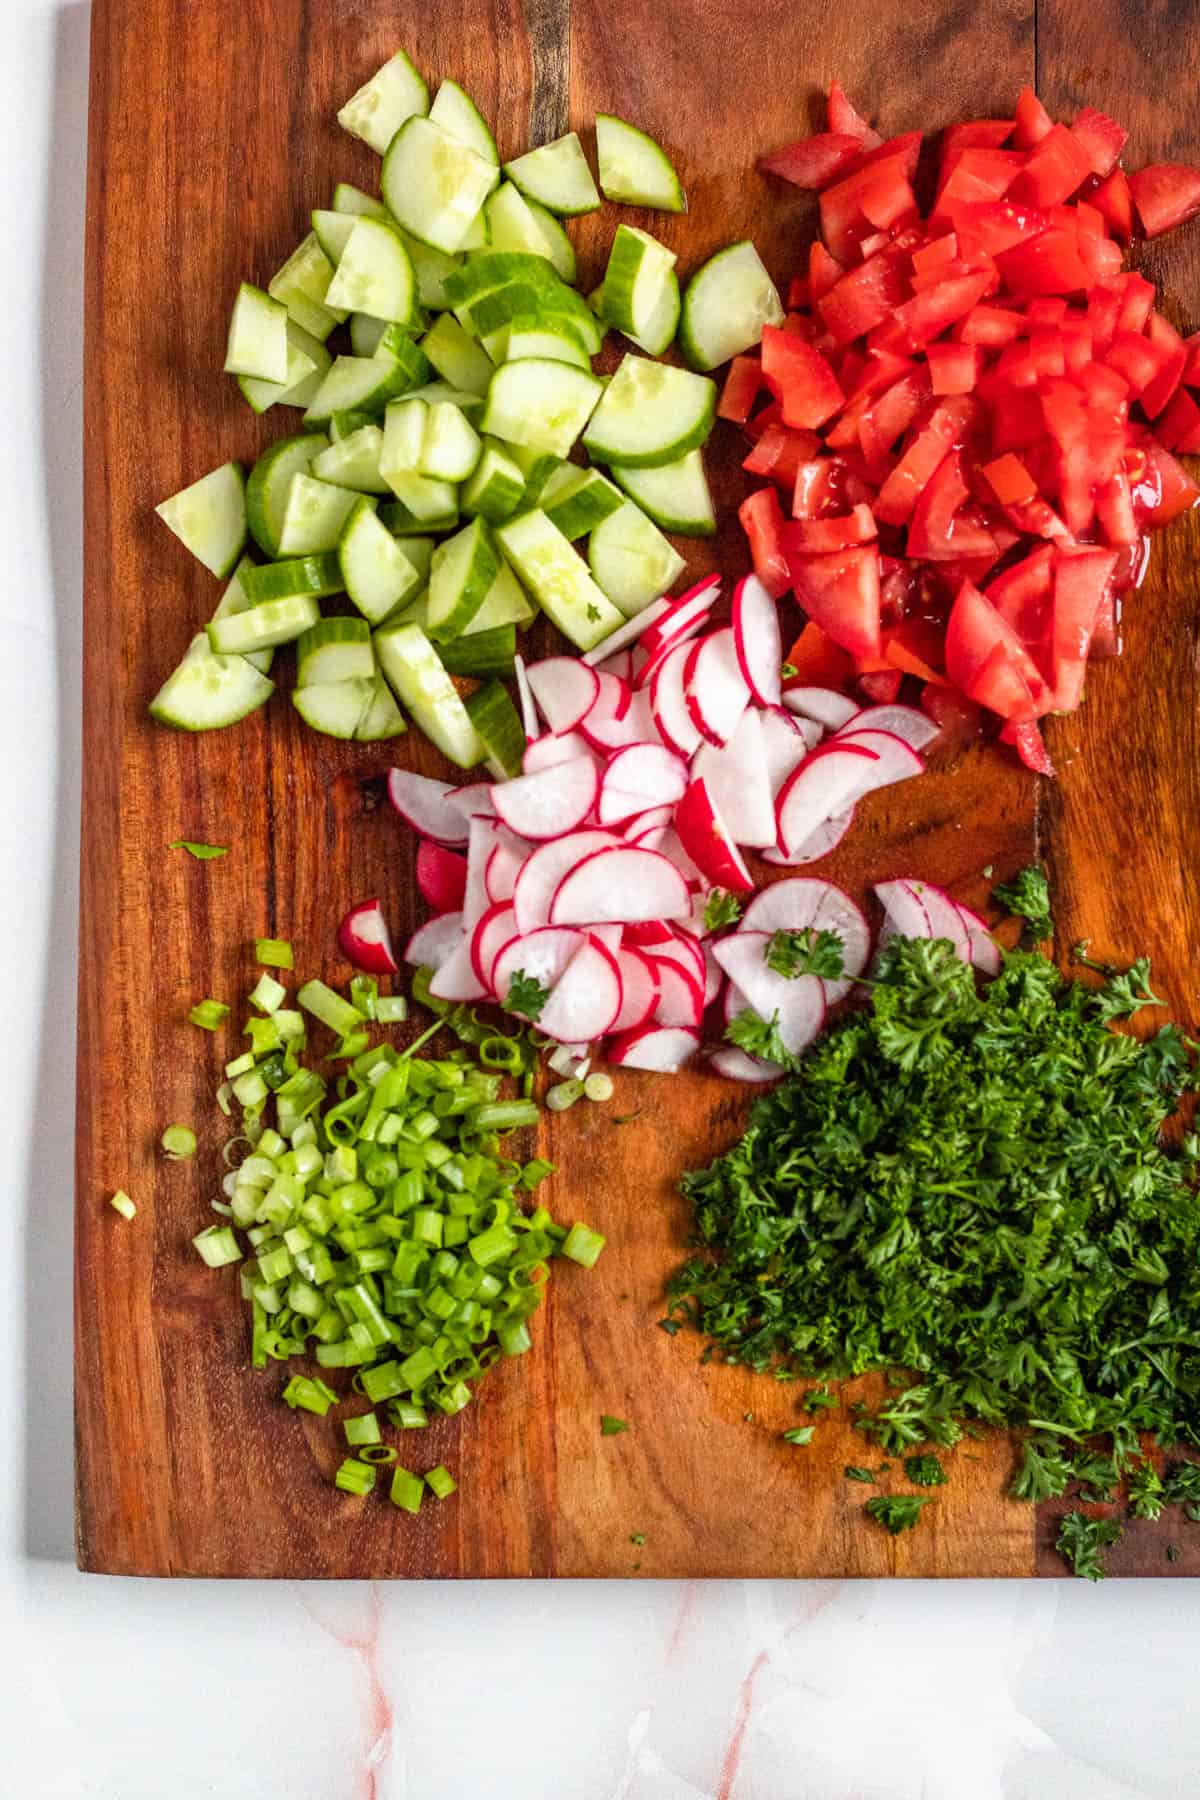 fattoush salad ingredients chopped up on a dark wooden cutting board